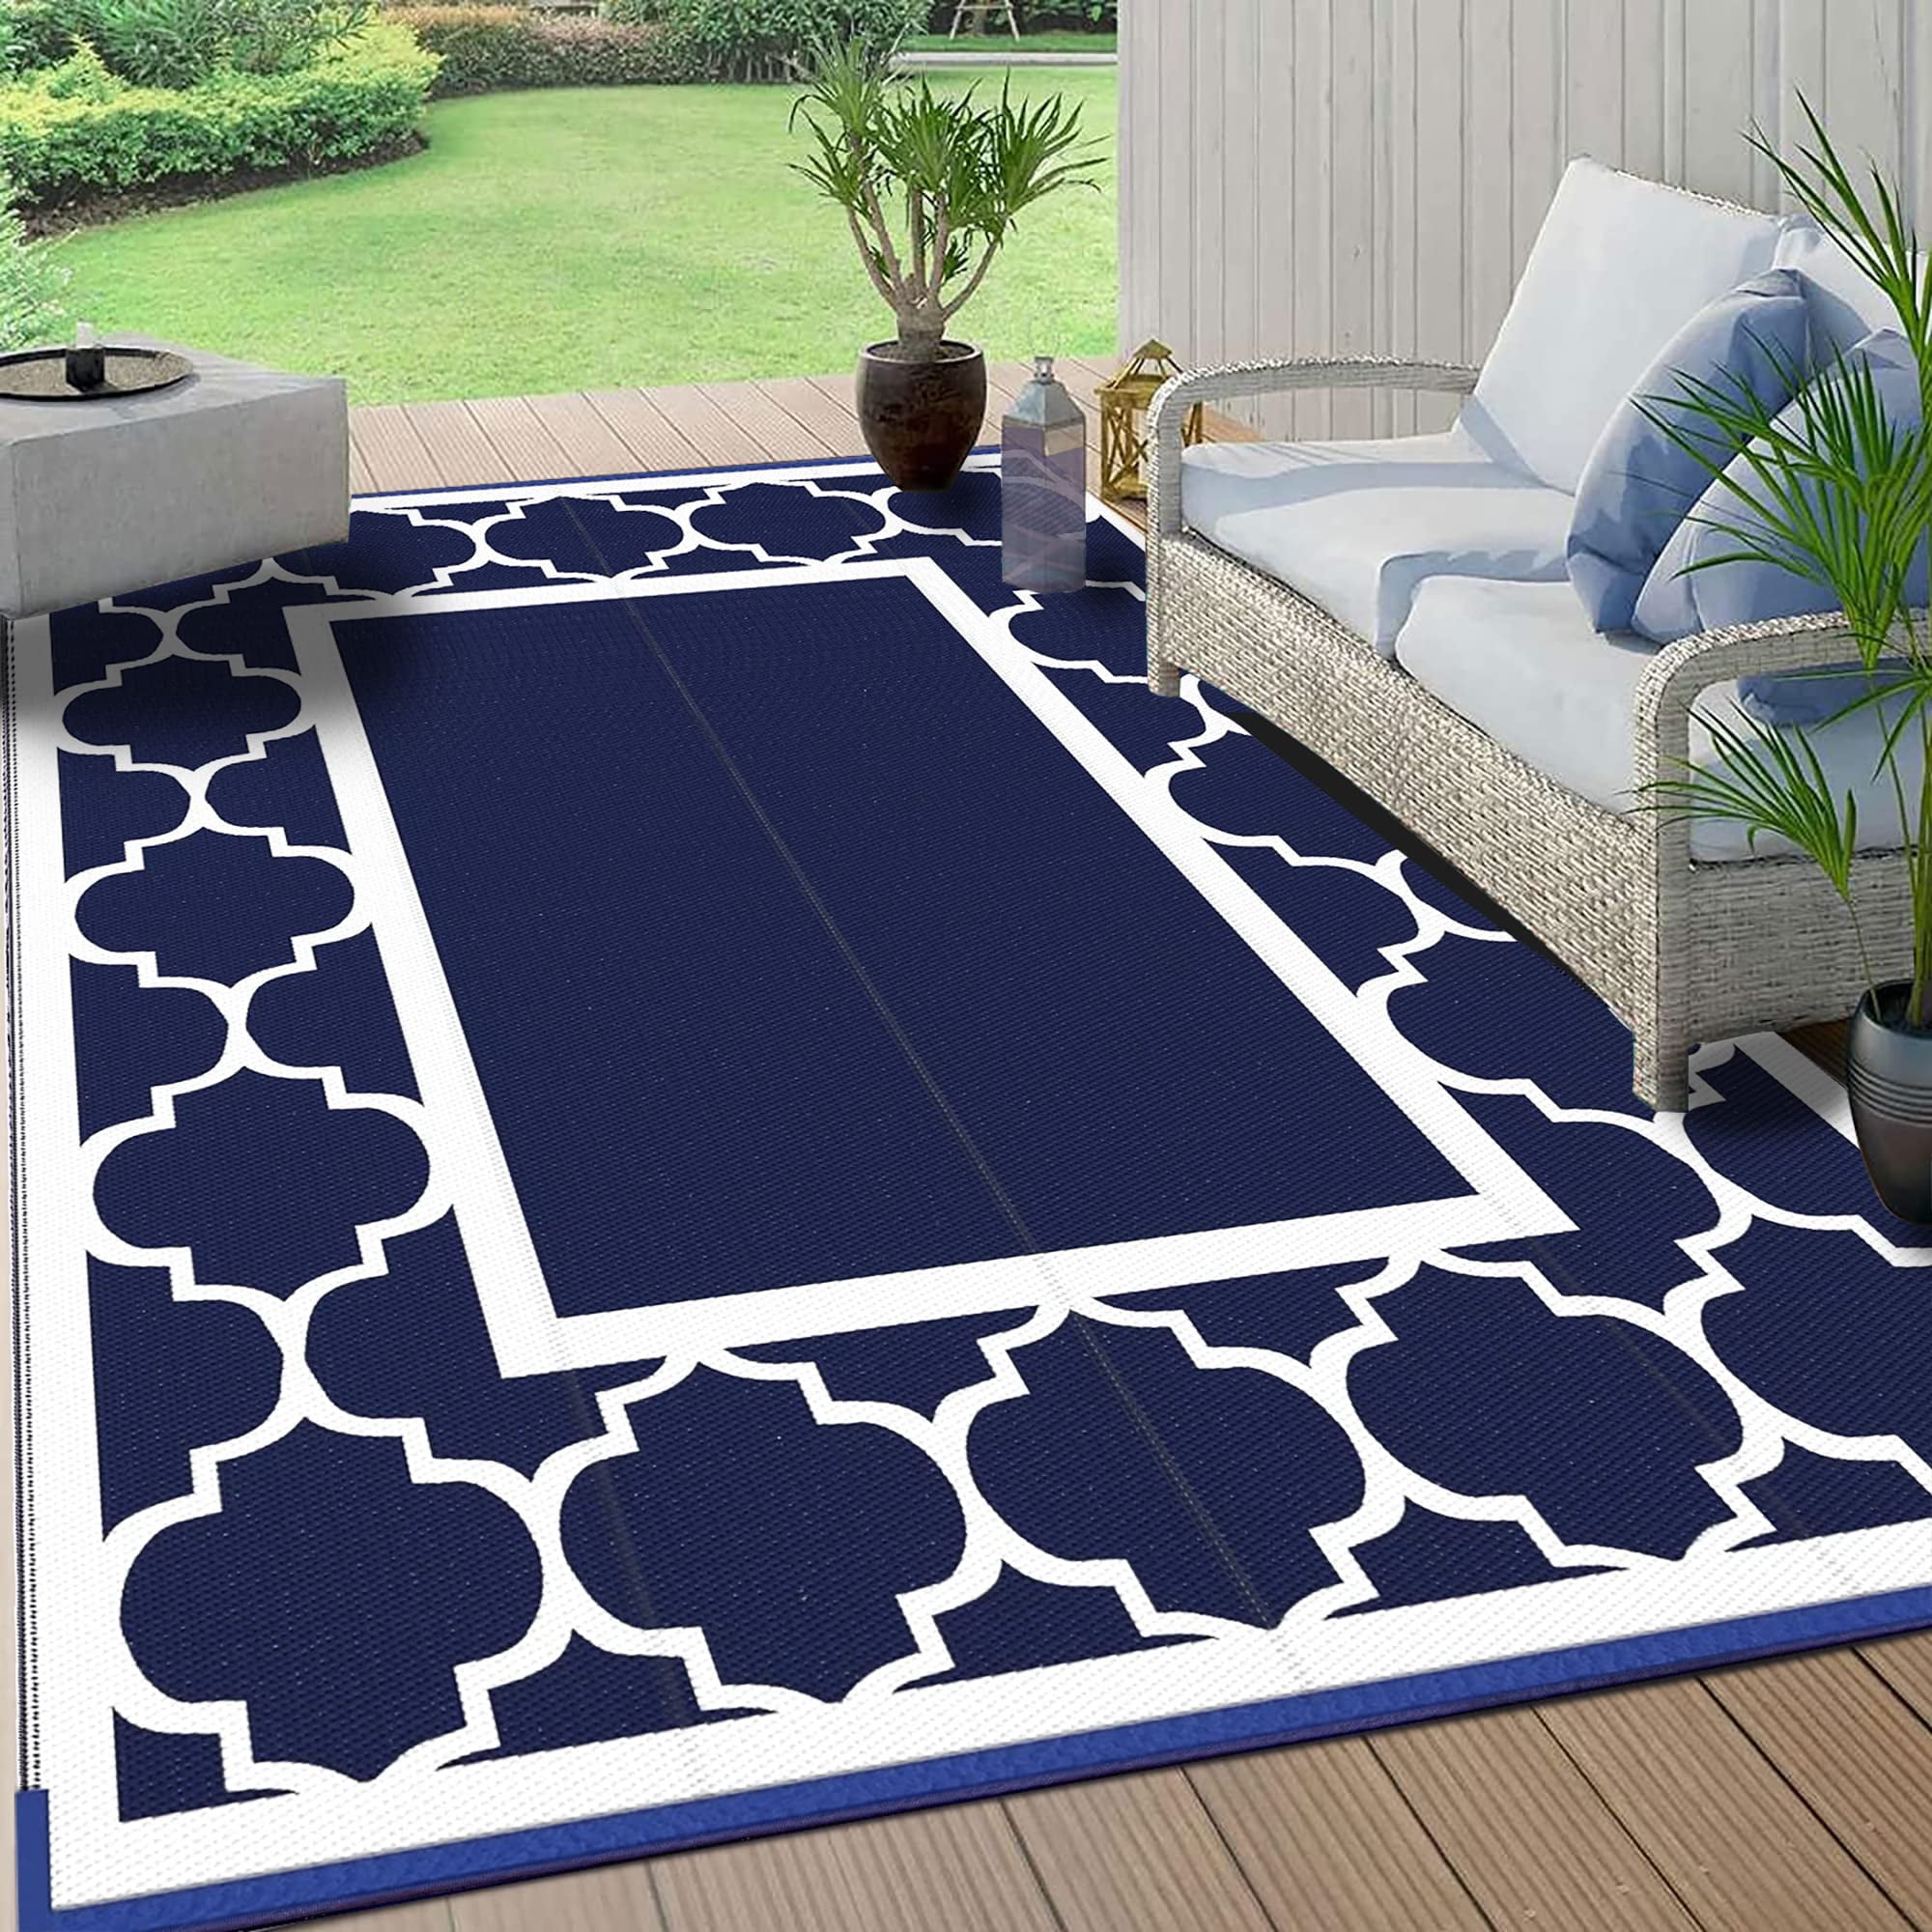 Front Porch Rug 27.5x43.3inch Blue and White Striped Outdoor Rug